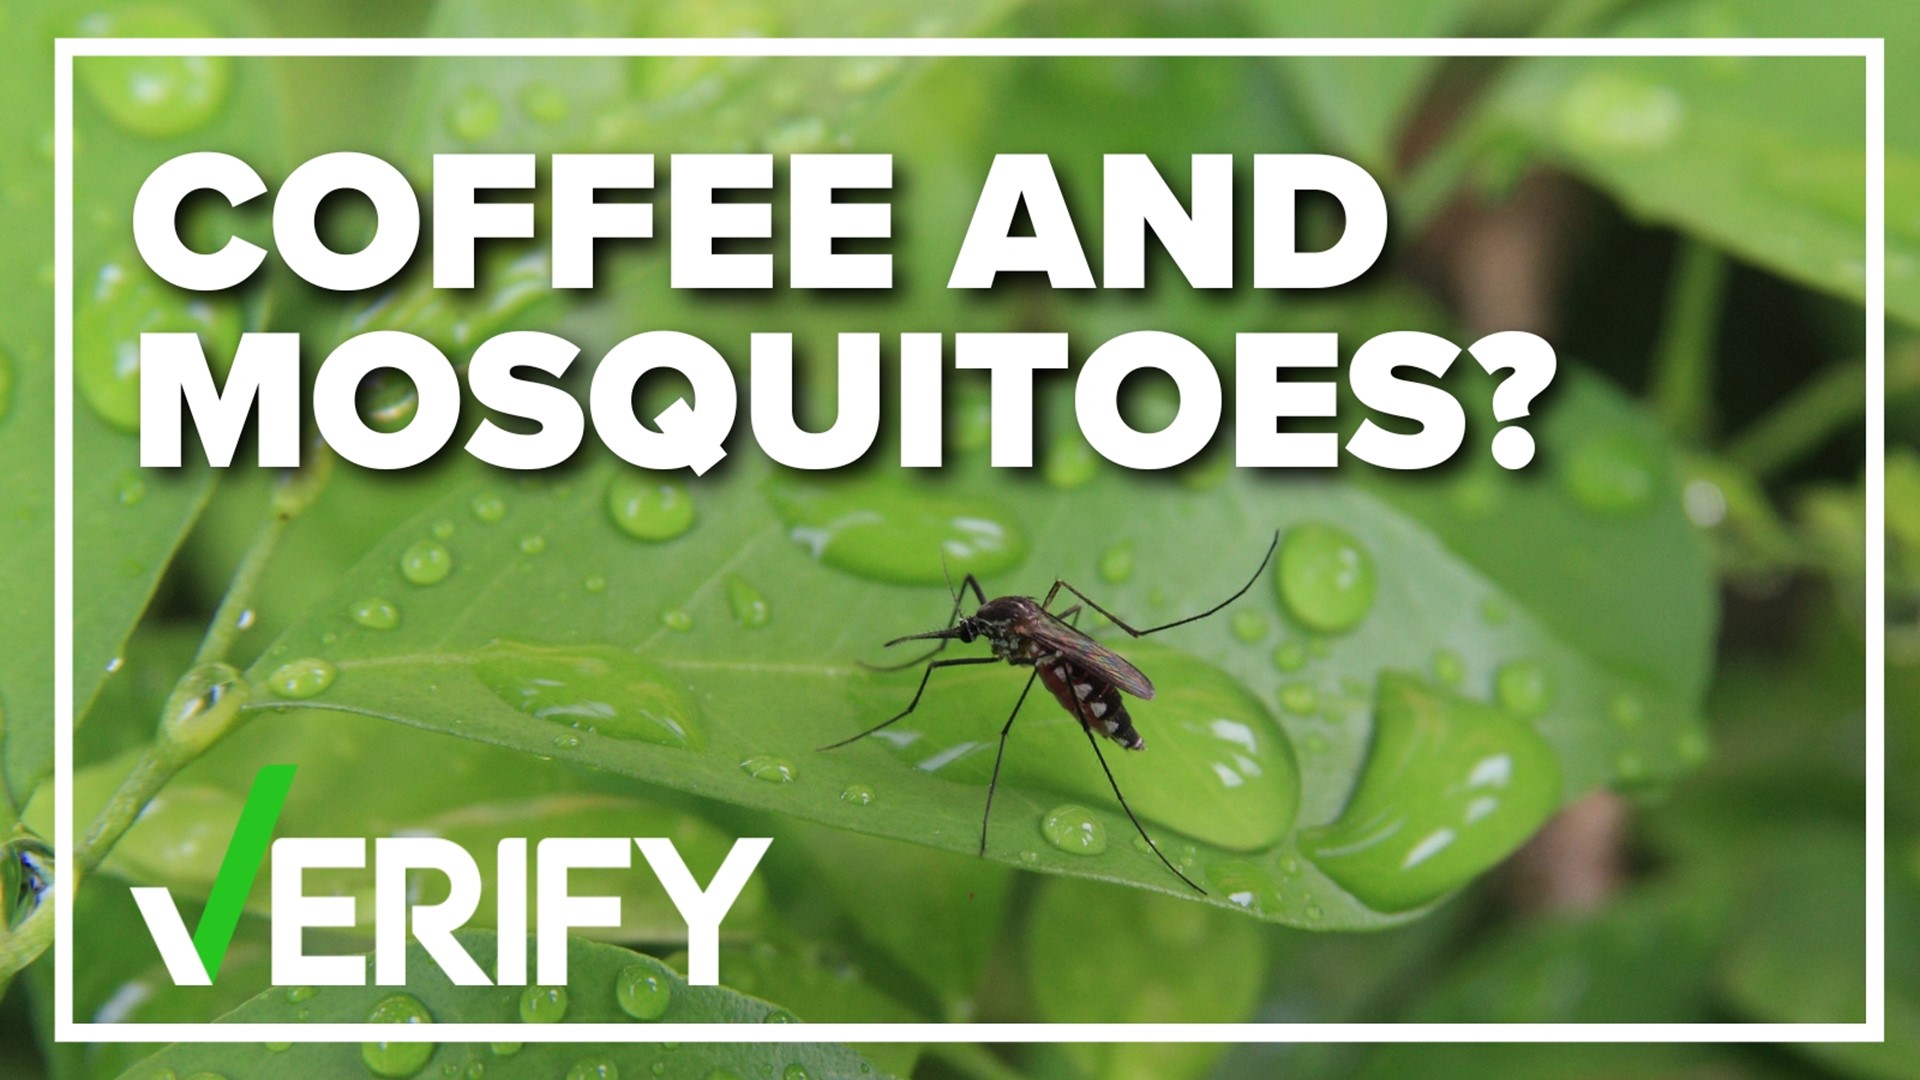 It's that time of year again-where the mosquitos are out. There are several remedies people suggest to get rid of them. One video claims coffee will do the trick.